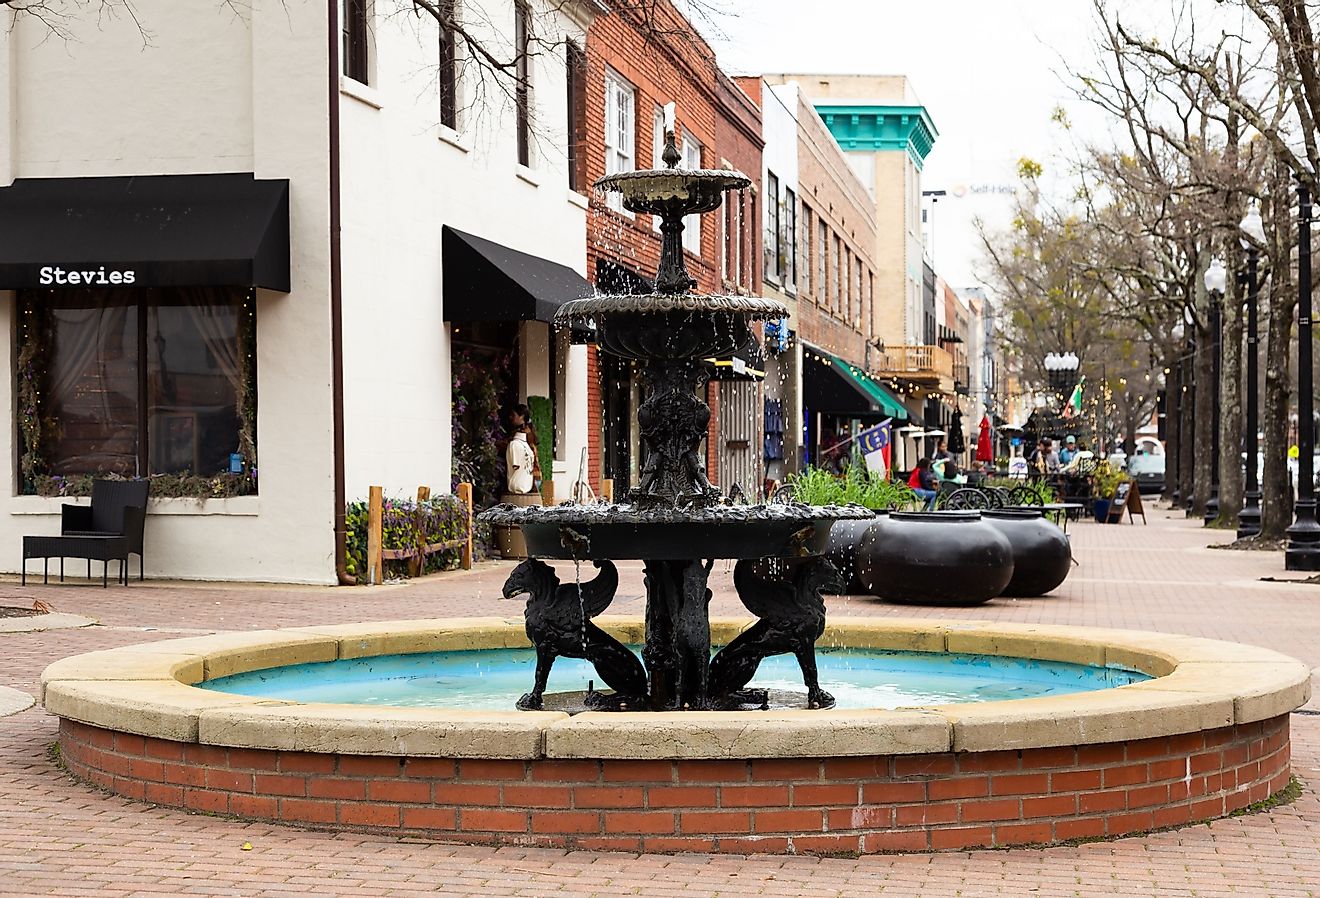 Streetview and elegant black fountain in Fayetteville, West Virginia. Image credit Anne Richard via Shutterstock.